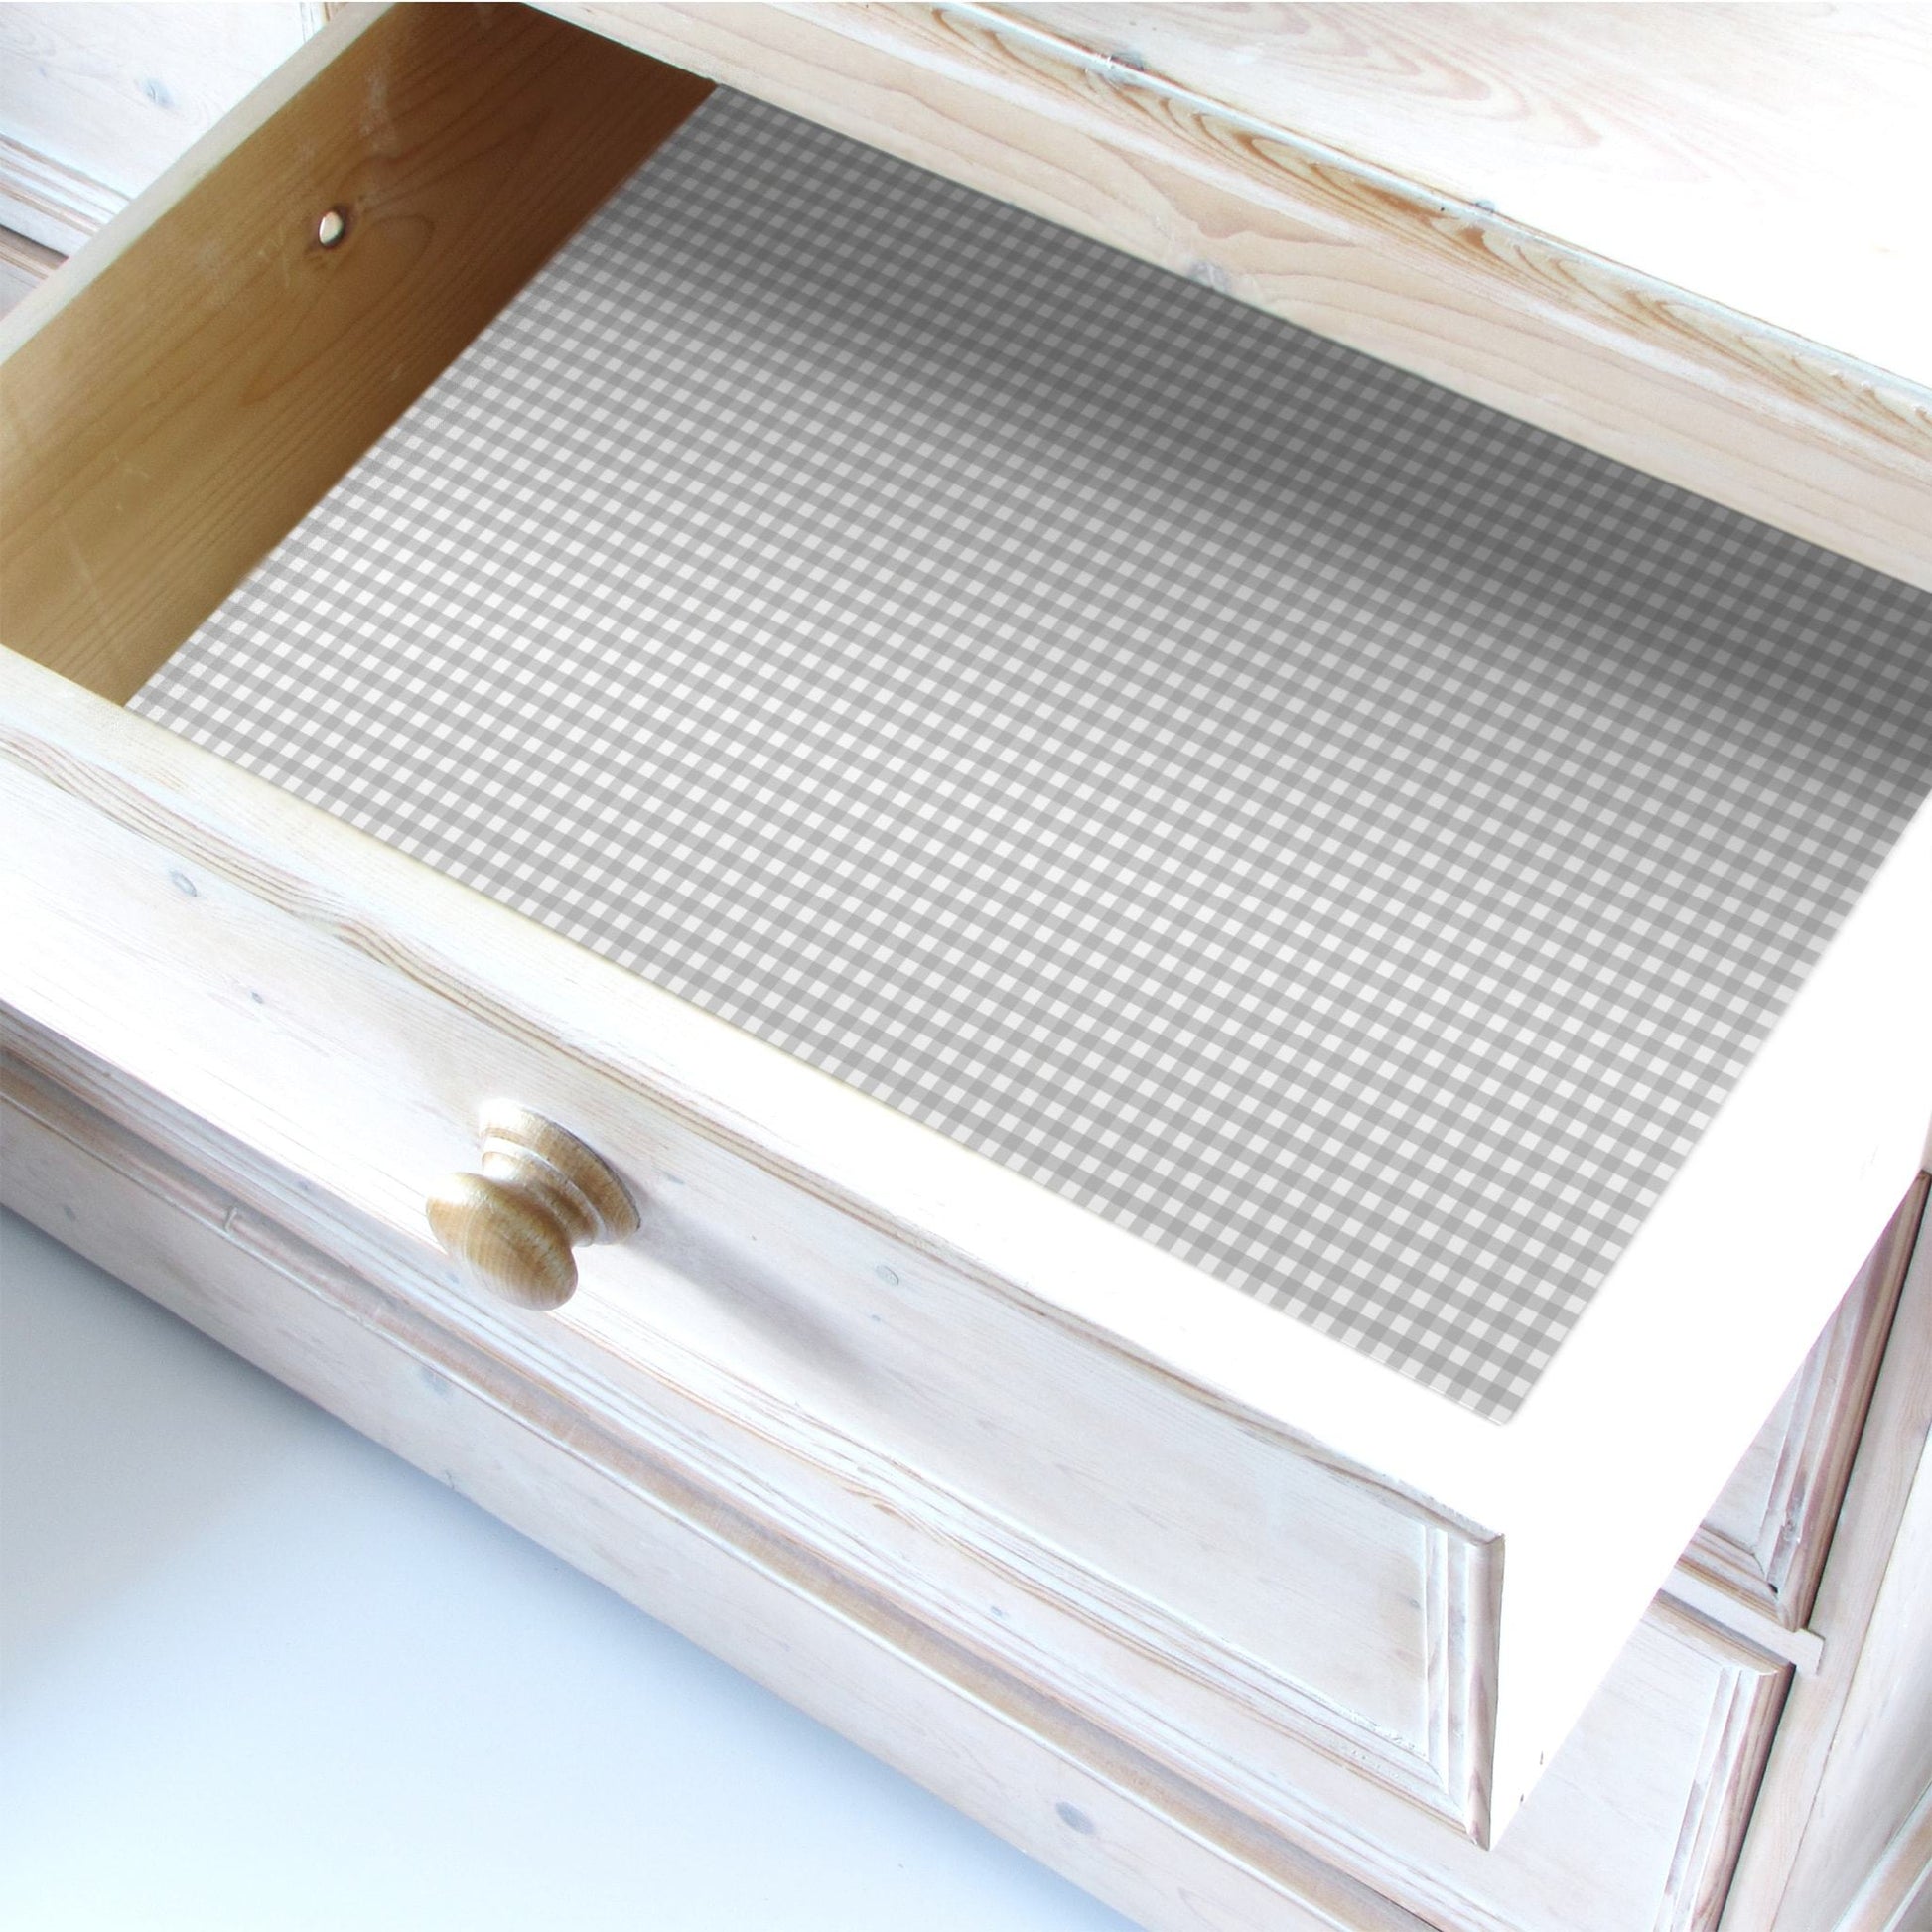 SIMPLY DRAWER LINERS | Wipe Clean & Unscented Drawer Liners in a SOFT GREY GINGHAM Design. Perfect for Kitchen Drawers, Shelves, Cupboards & Cabinets. Made in Suffolk, England. (Soft Grey)